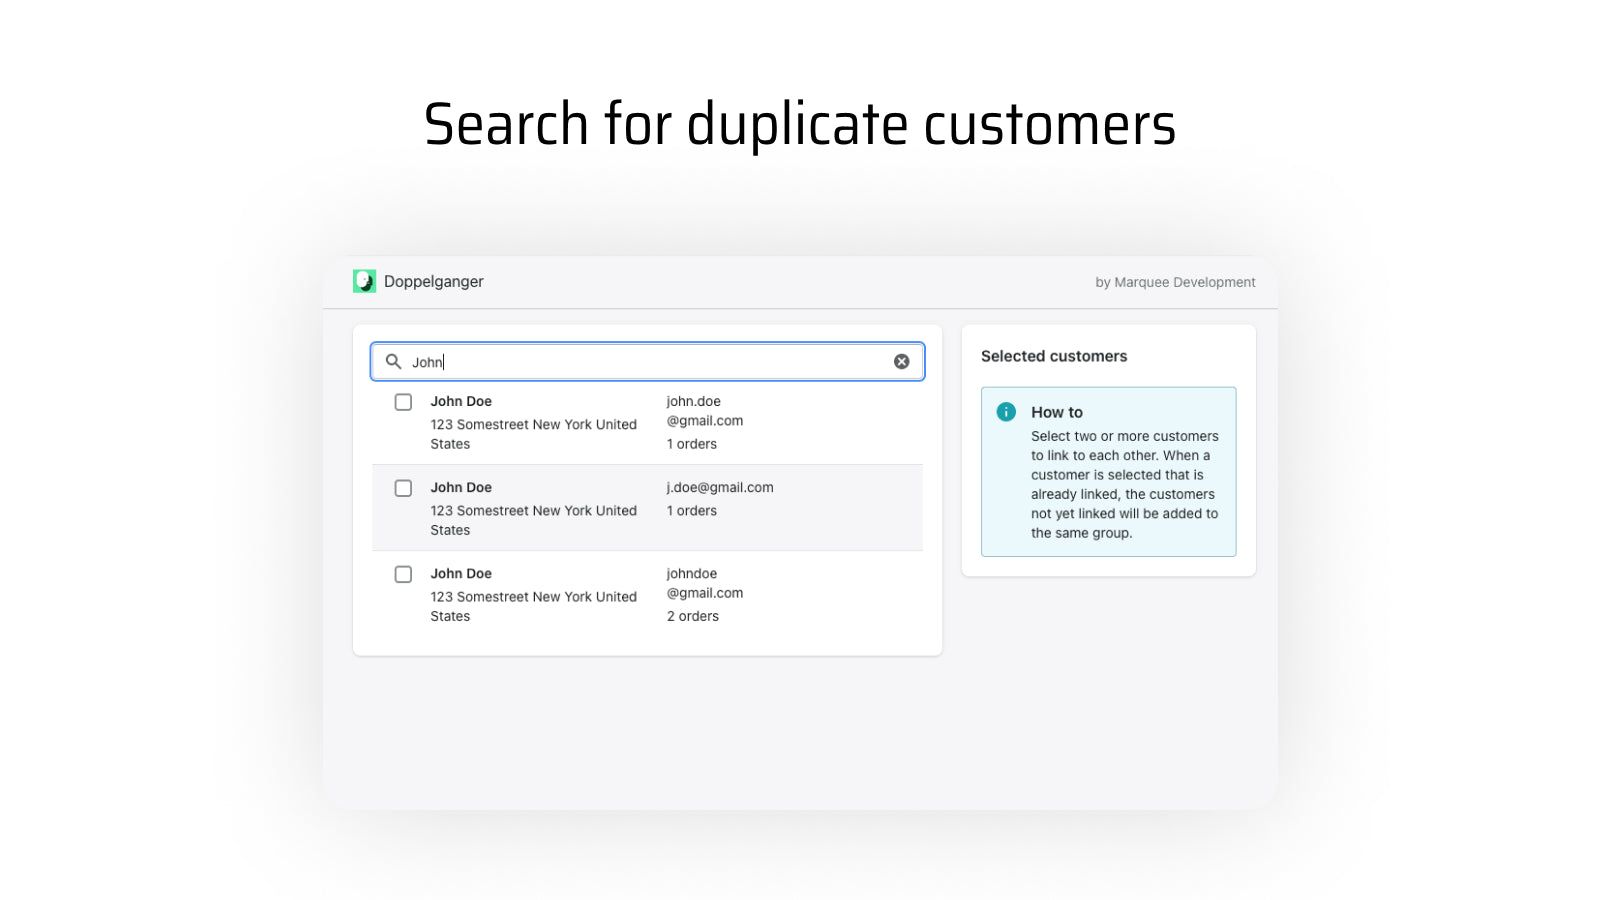 List of customers filtered by a search query in a search bar